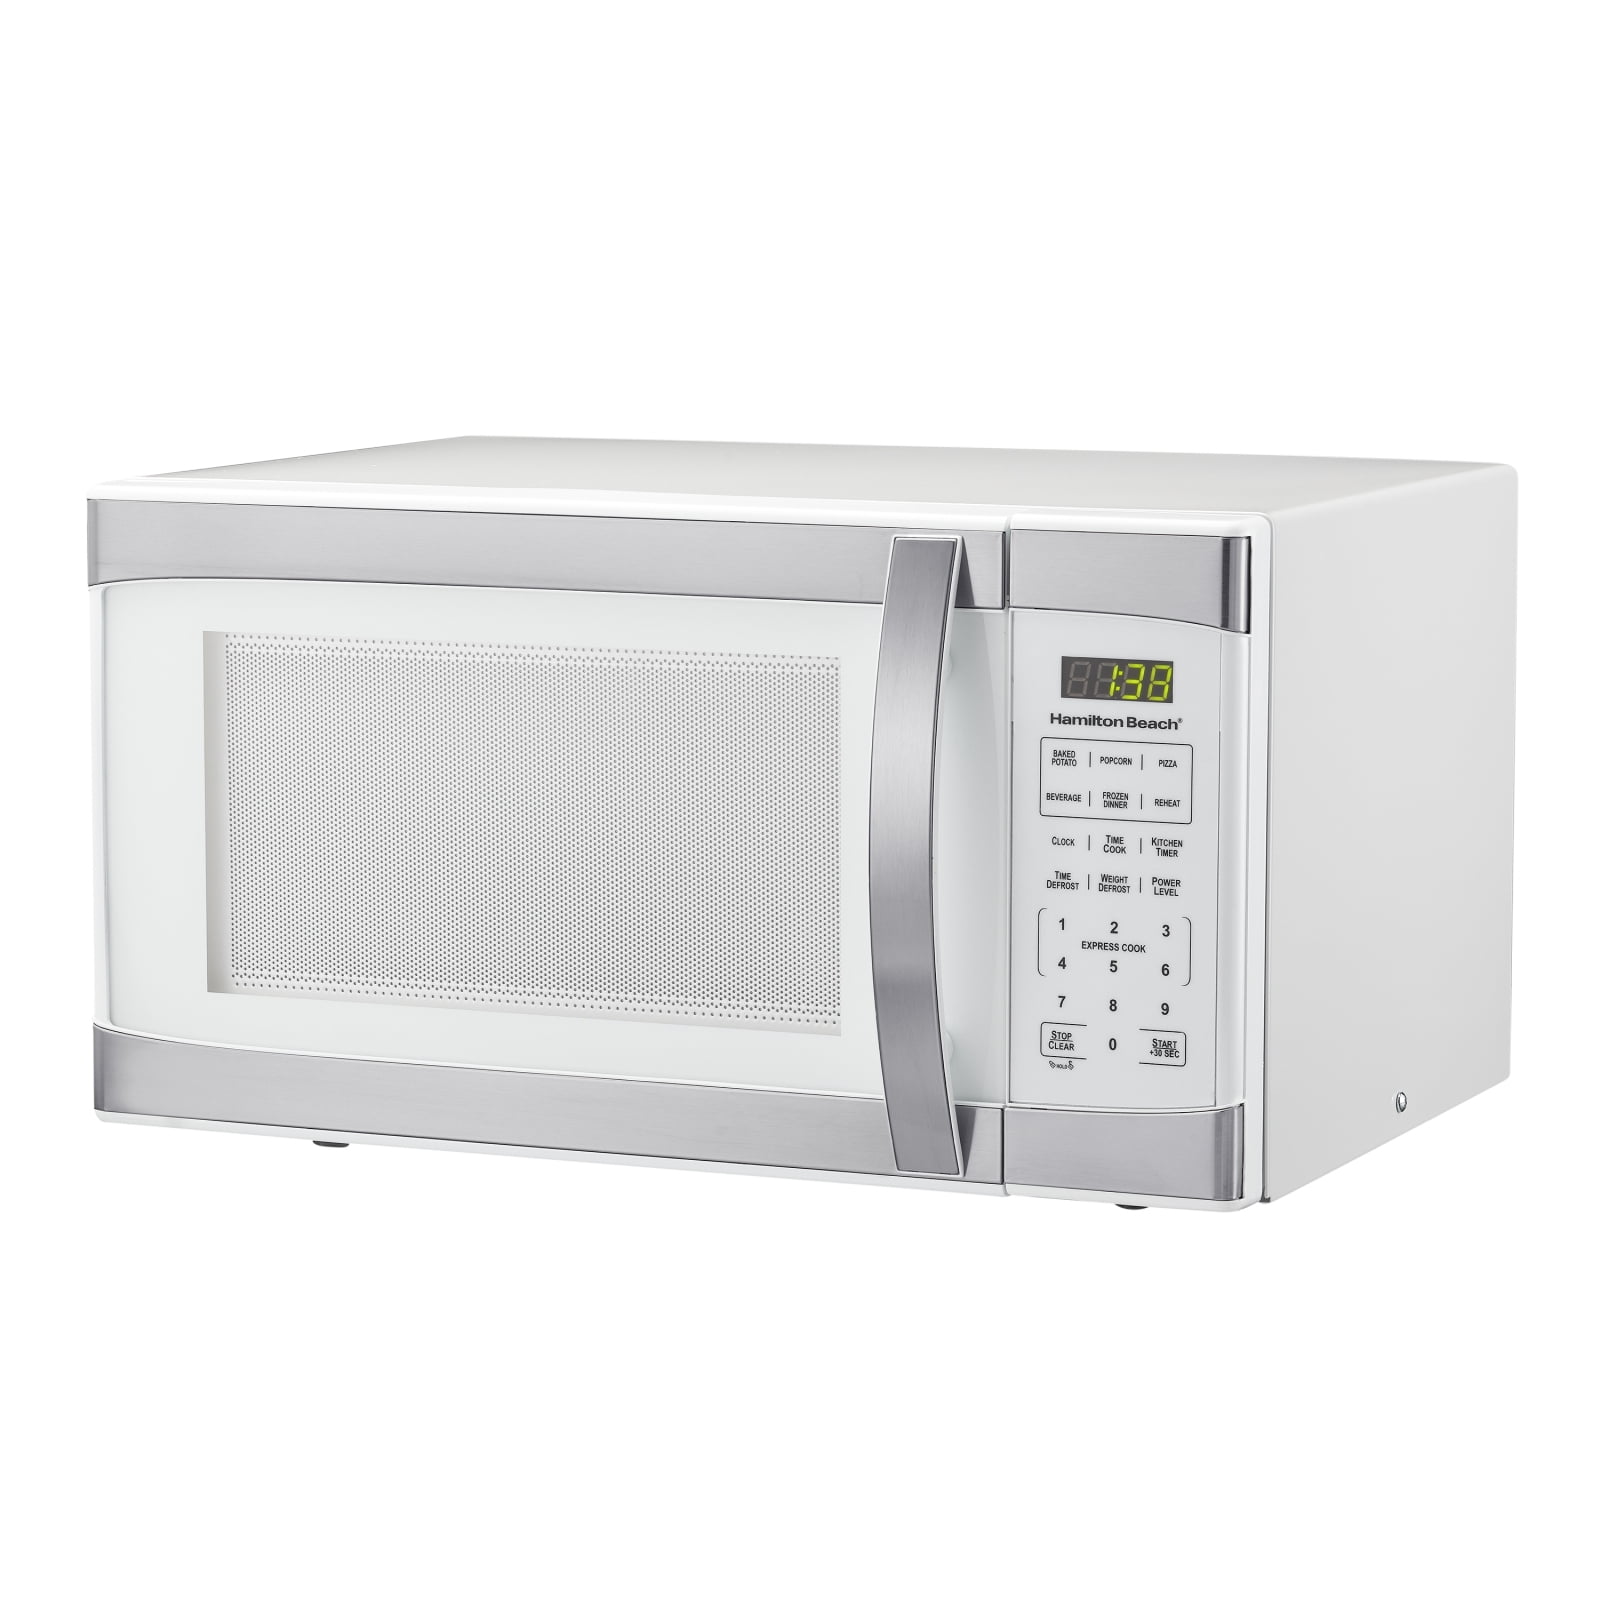 Hamilton Beach 11 Cuft White With Stainless Steel Digital Microwave Oven Walmartcom